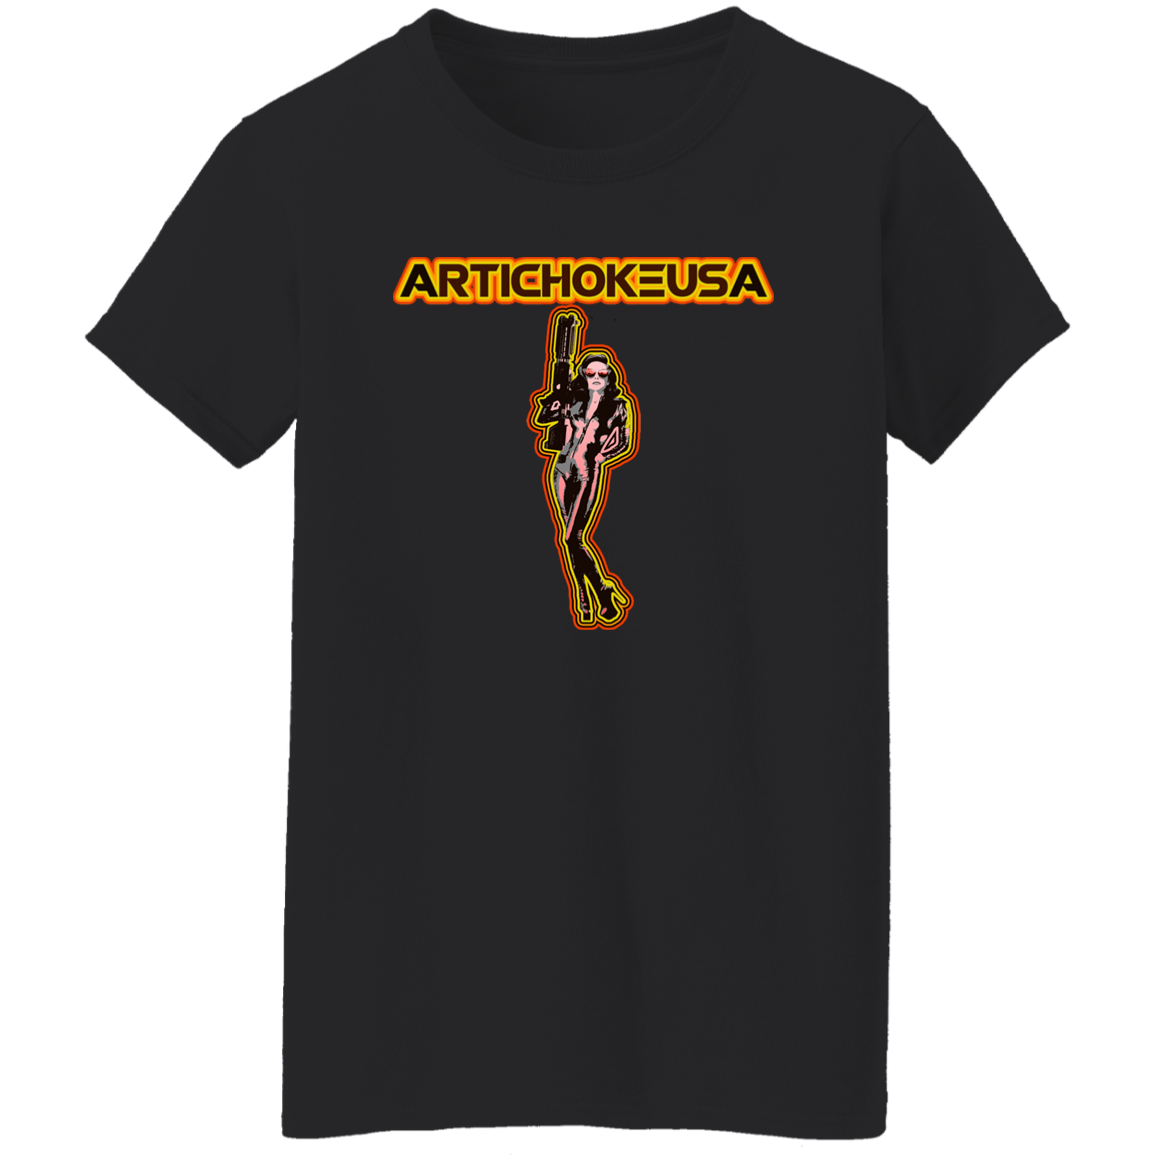 ArtichokeUSA Character and Font design. Let's Create Your Own Team Design Today. Mary Boom Boom. Ladies' 5.3 oz. T-Shirt